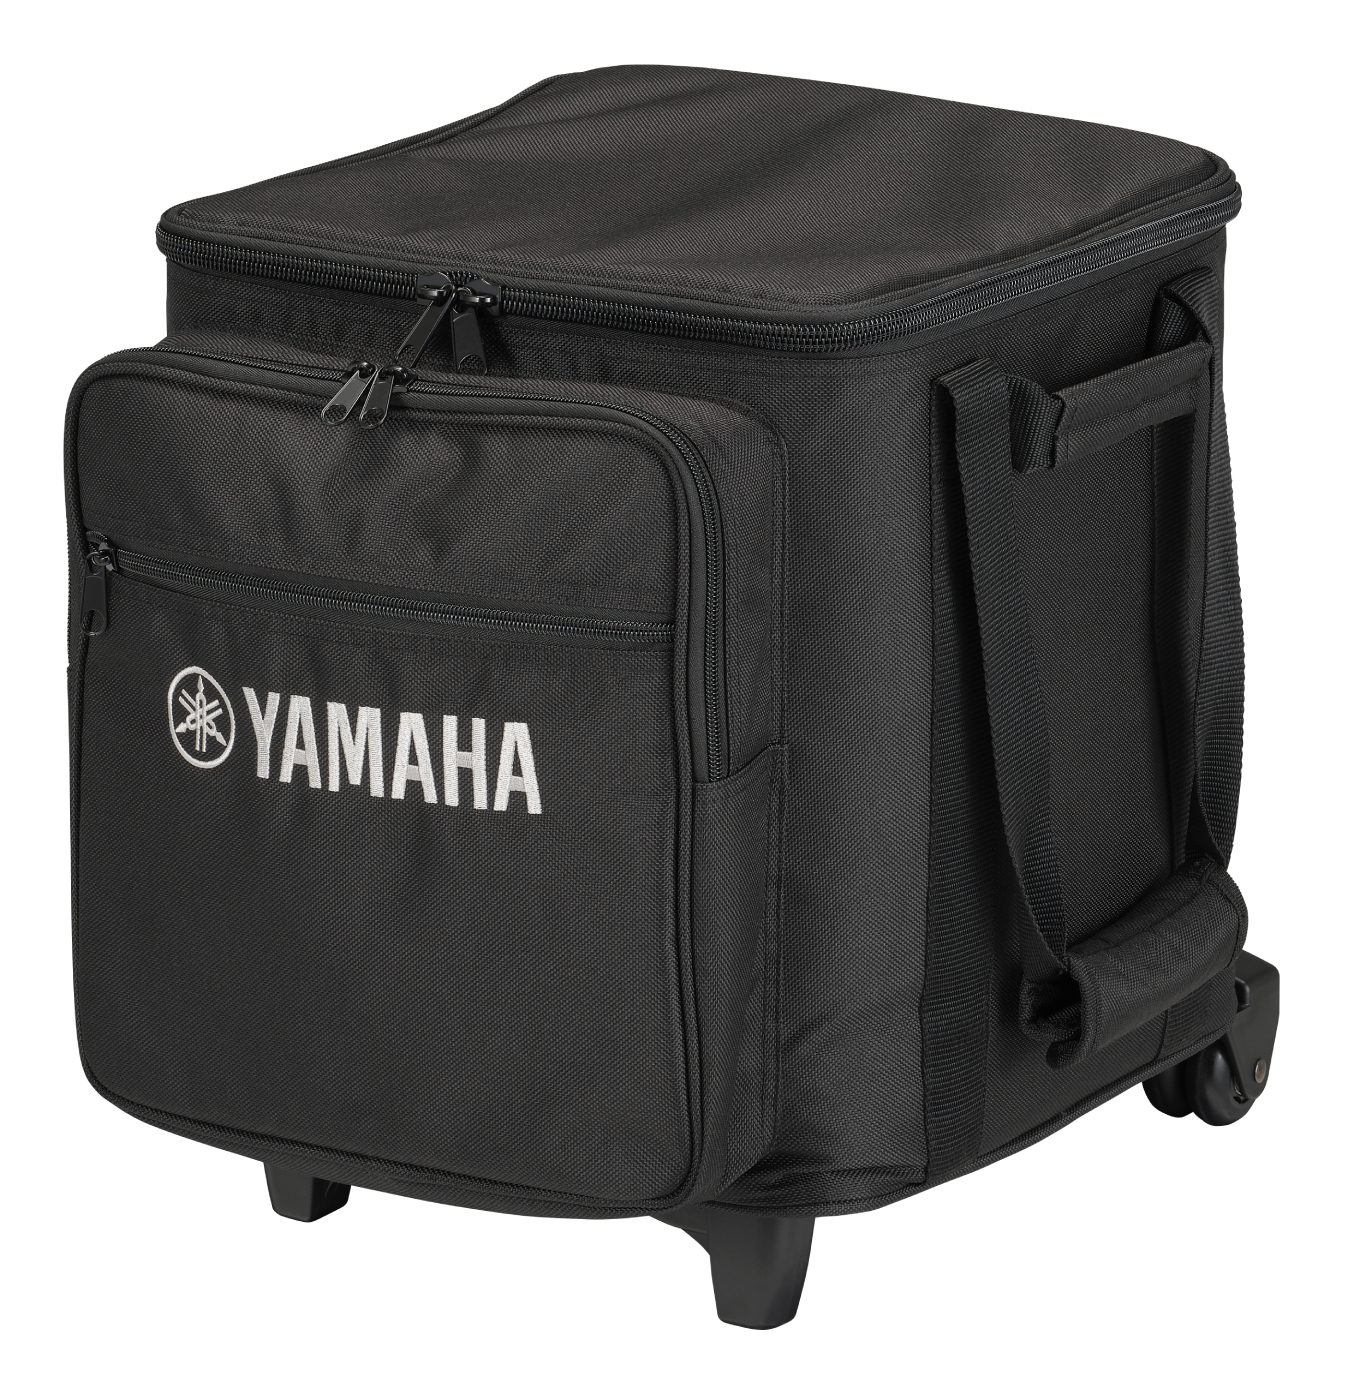 Yamaha Stagepas 200  + Valise Pour Stagepas 200 - Complete PA system - Variation 2